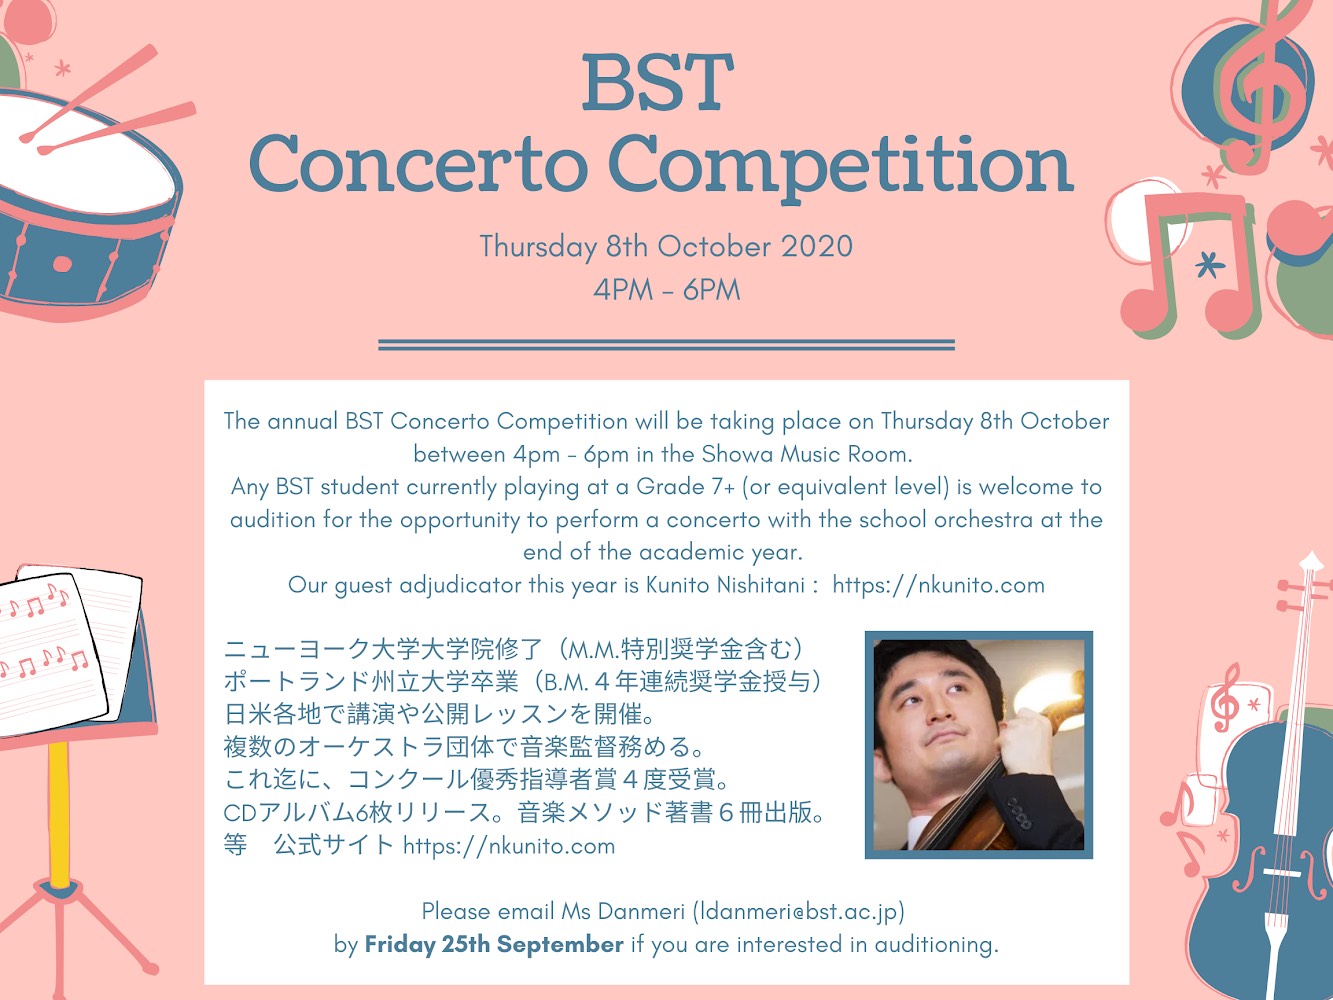 Concerto Competition @ British School in Tokyo (BST)